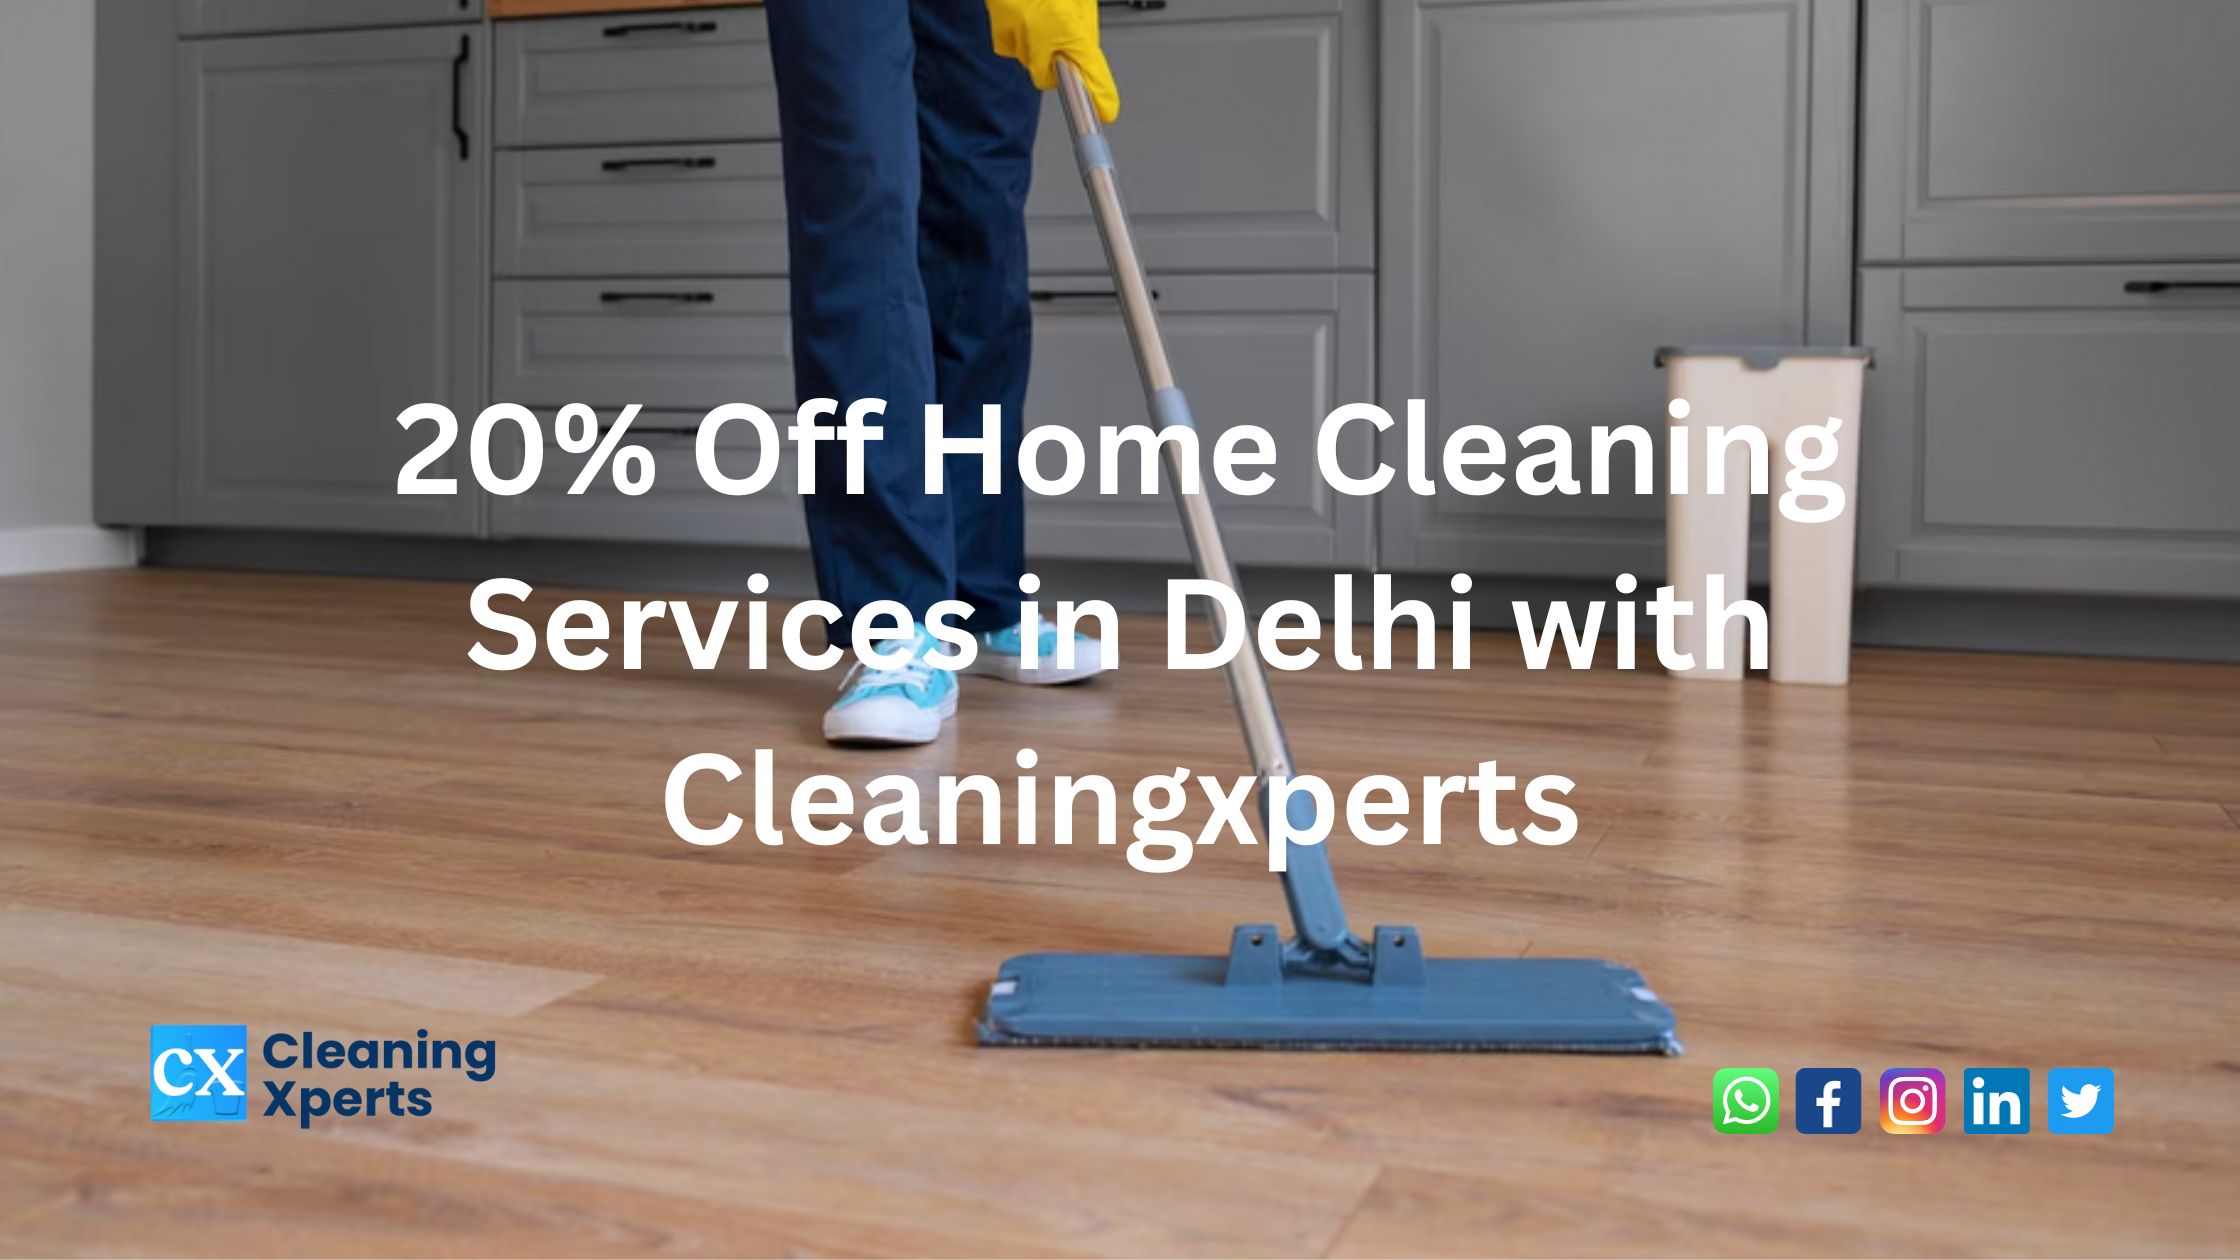 20% Off Home Cleaning Services in Delhi with Cleaningxperts